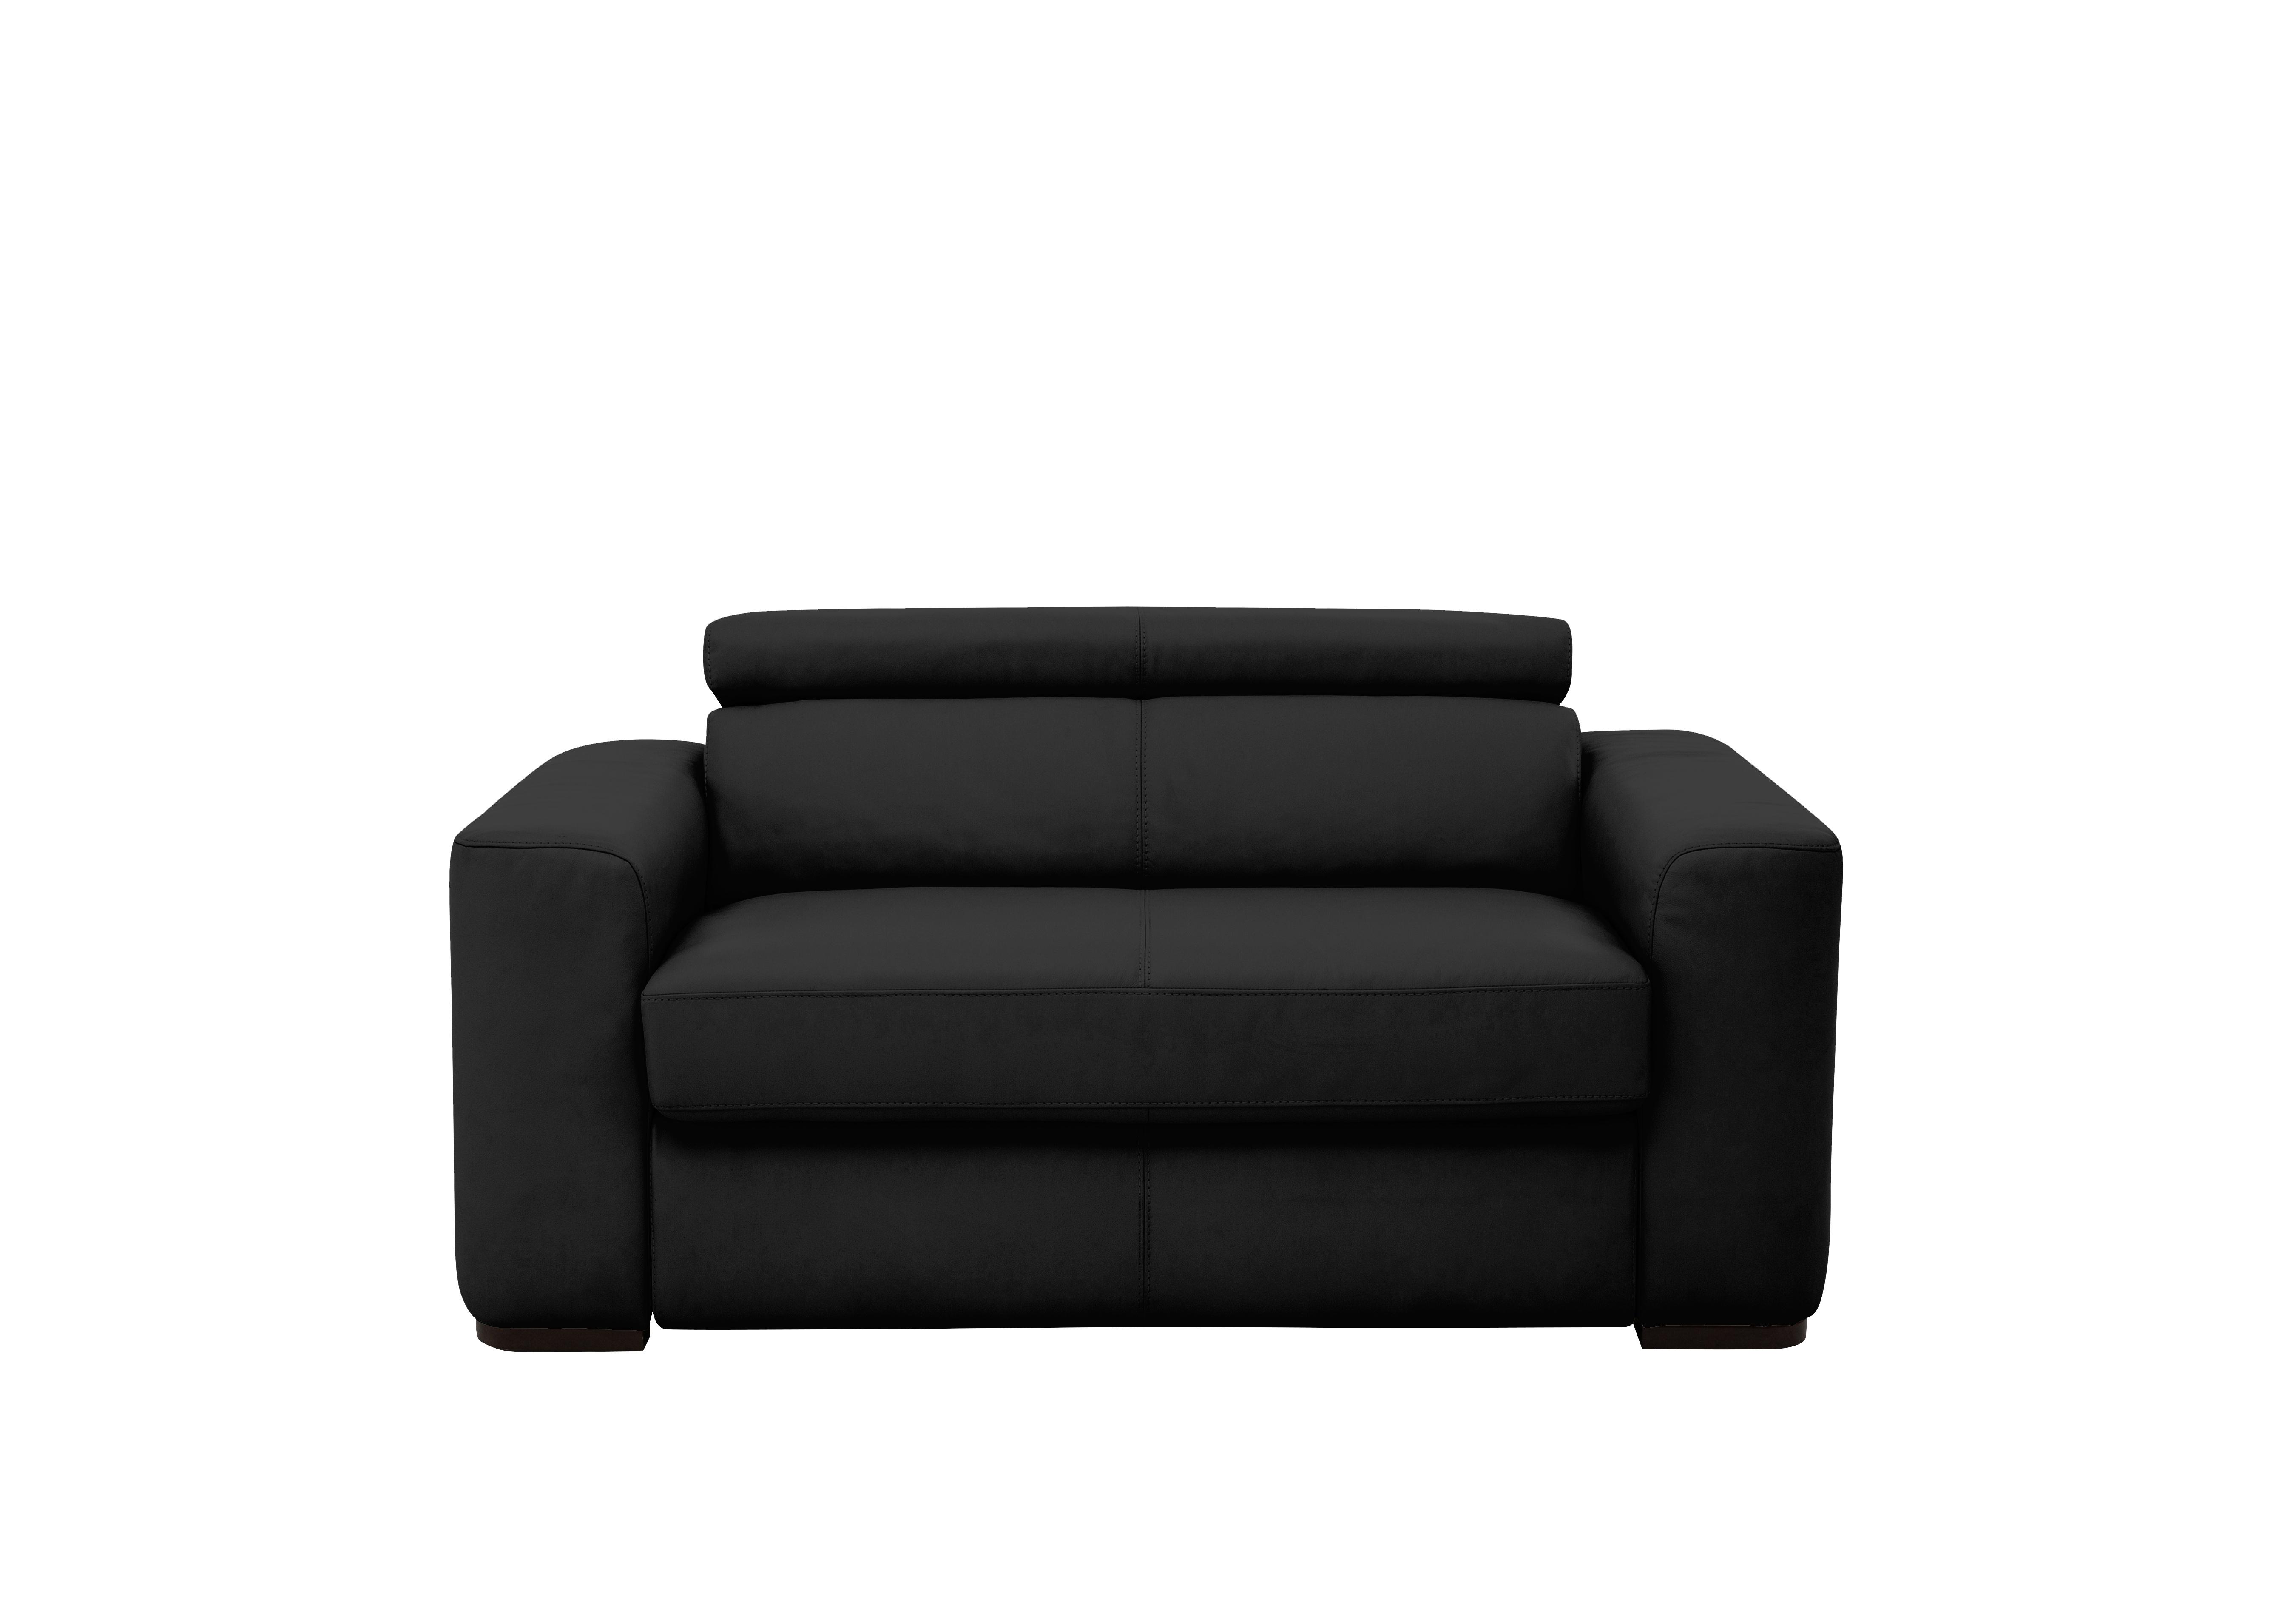 Infinity Leather Chair Sofabed in Bv-3500 Classic Black on Furniture Village